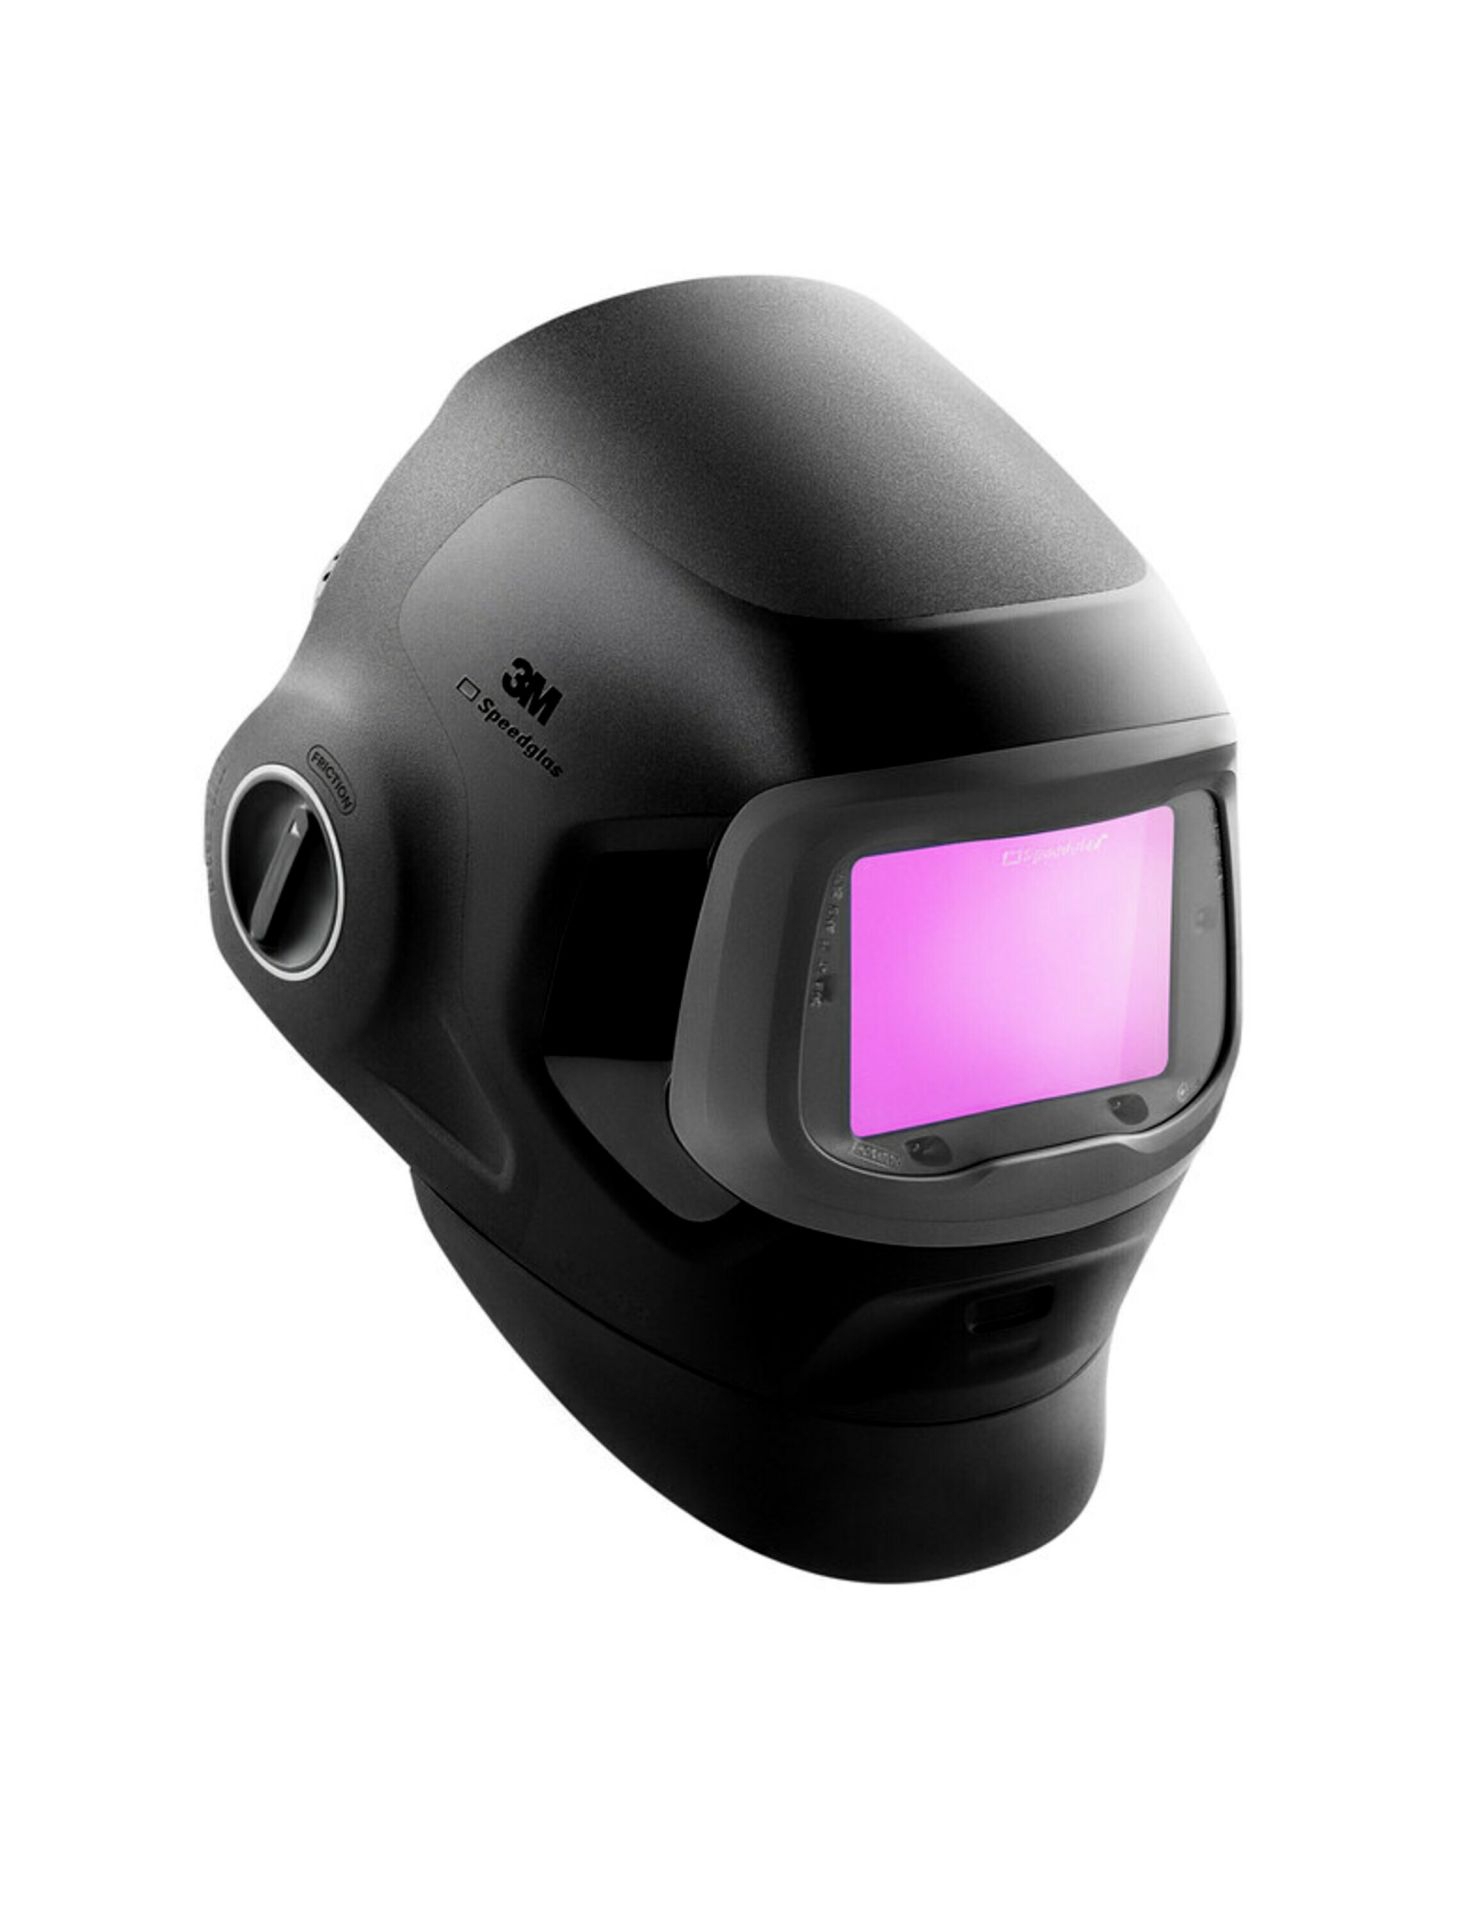 3M Speedglas Welding mask G5-03 Pro with automatic welding filter (ADF) 03VC 631830